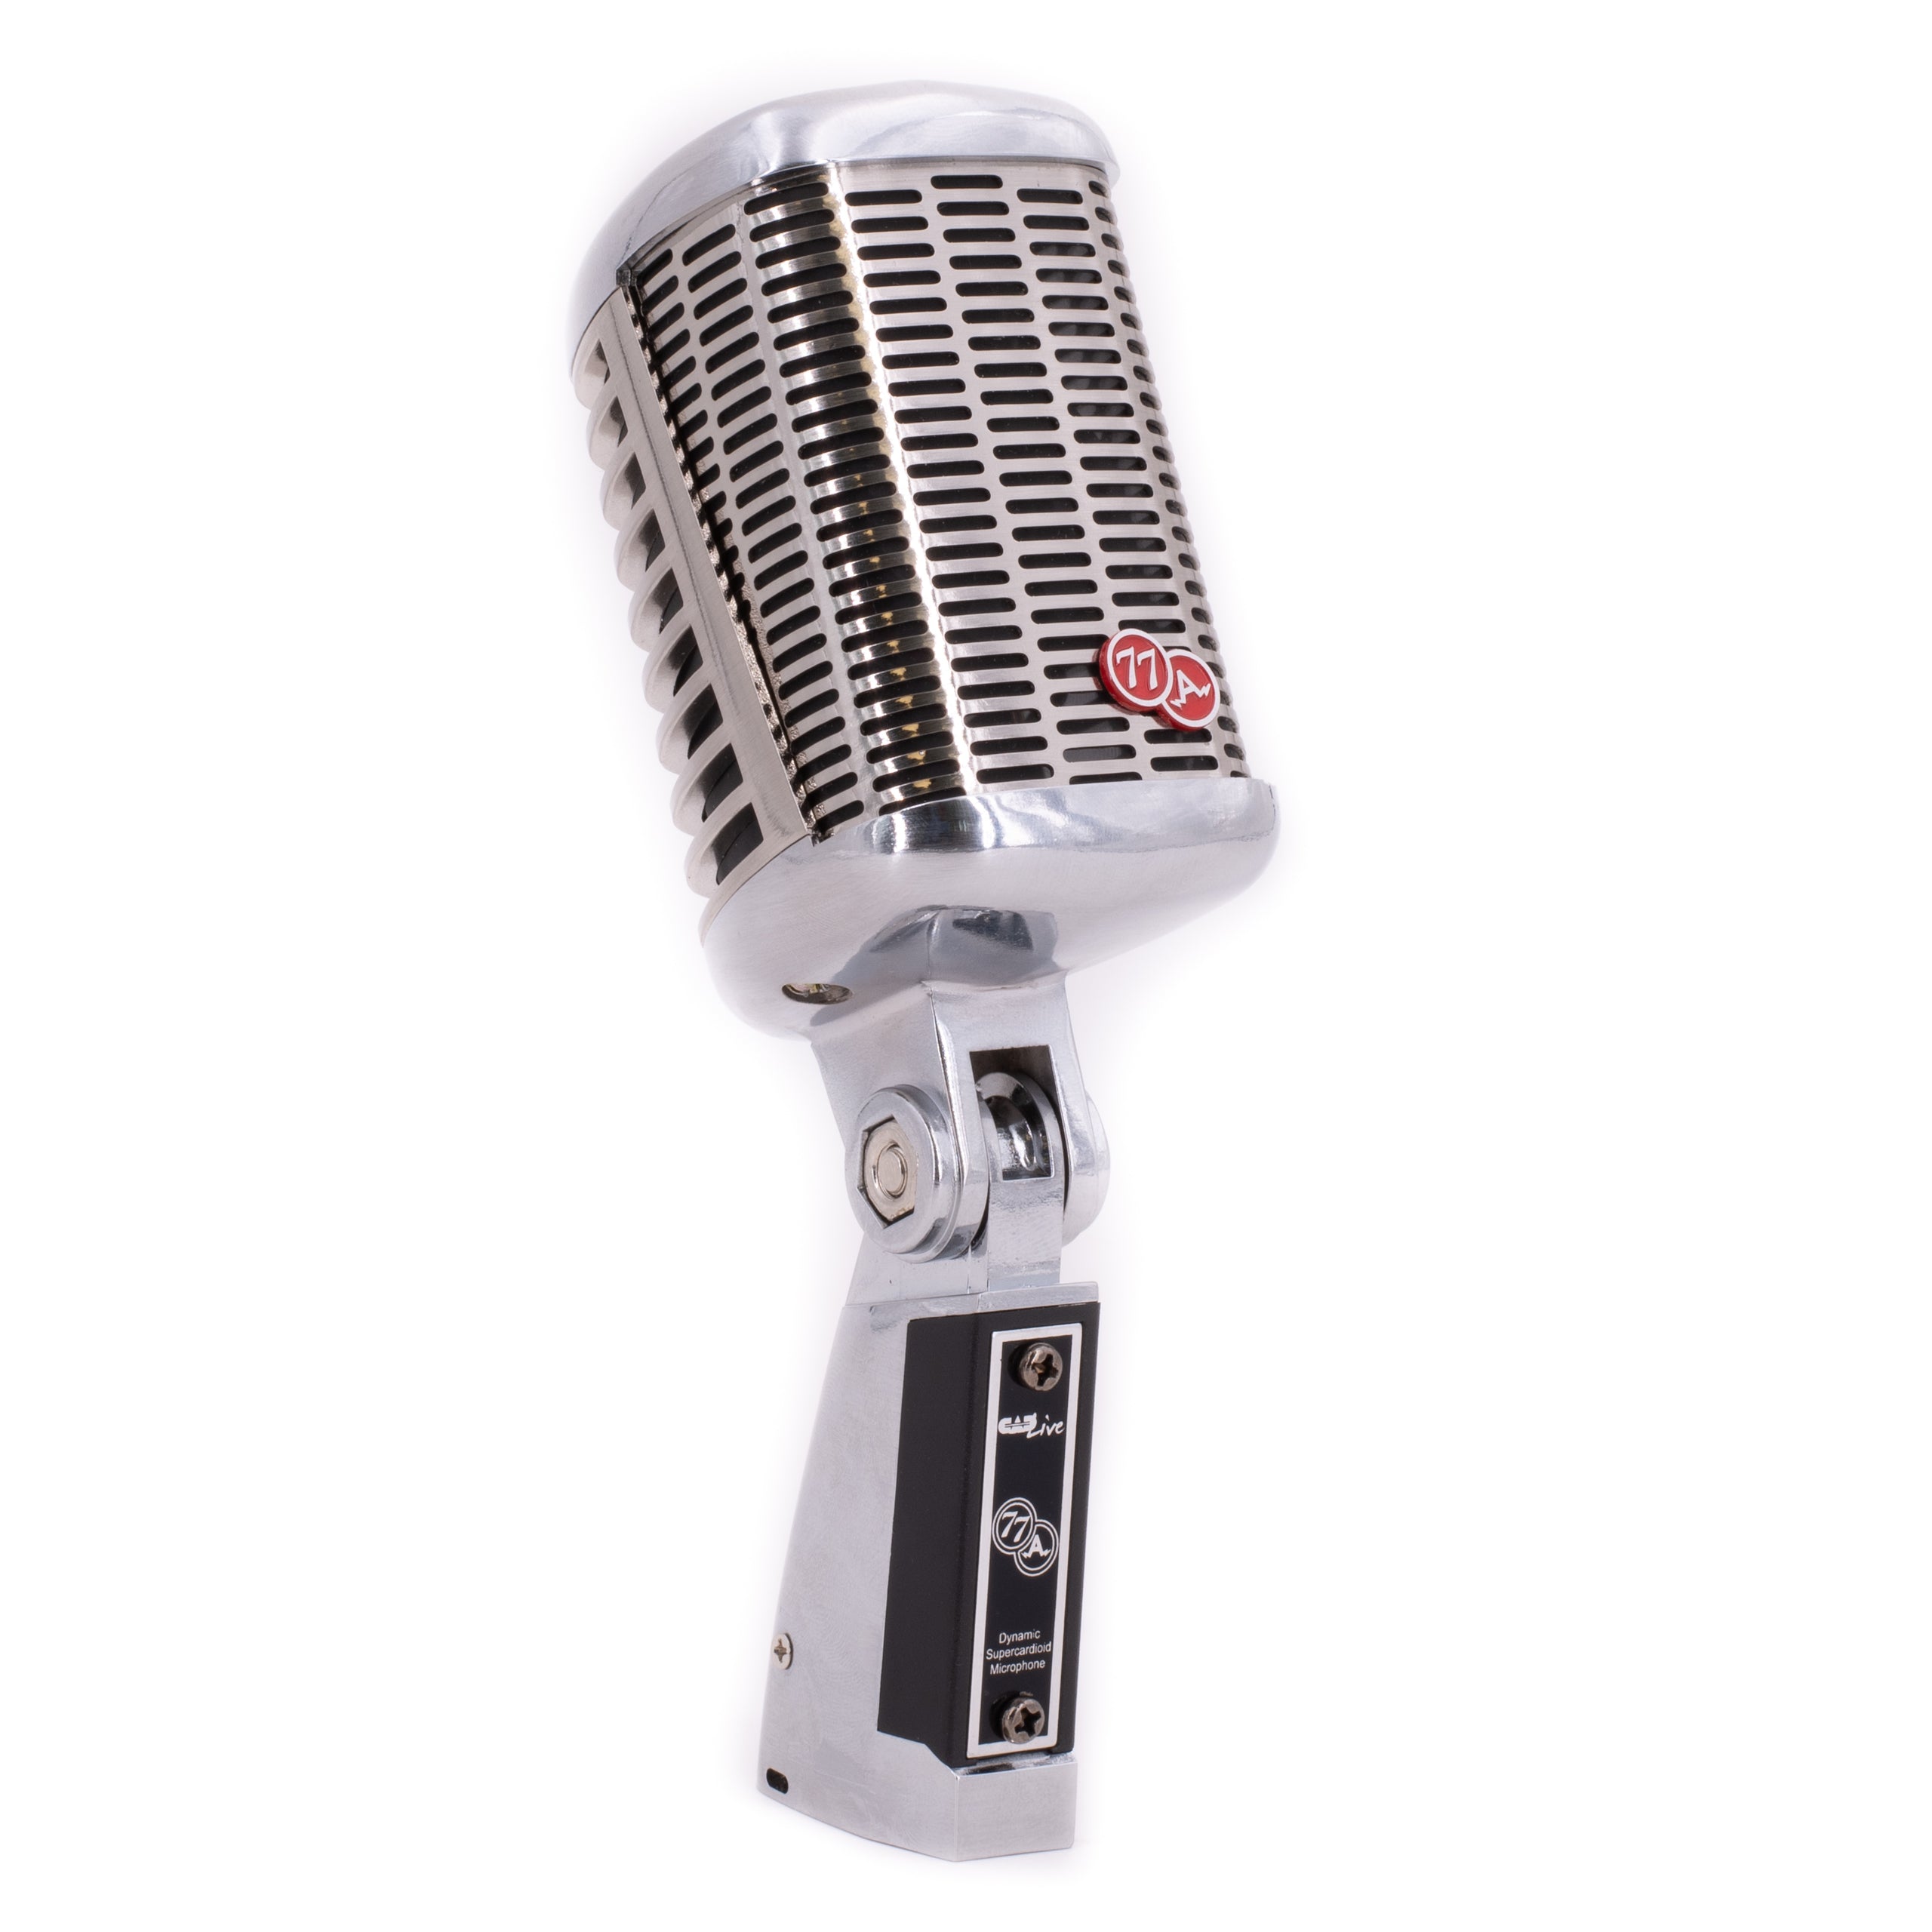 CAD A77 USB Vintage Supercardioid Microphone, View 1